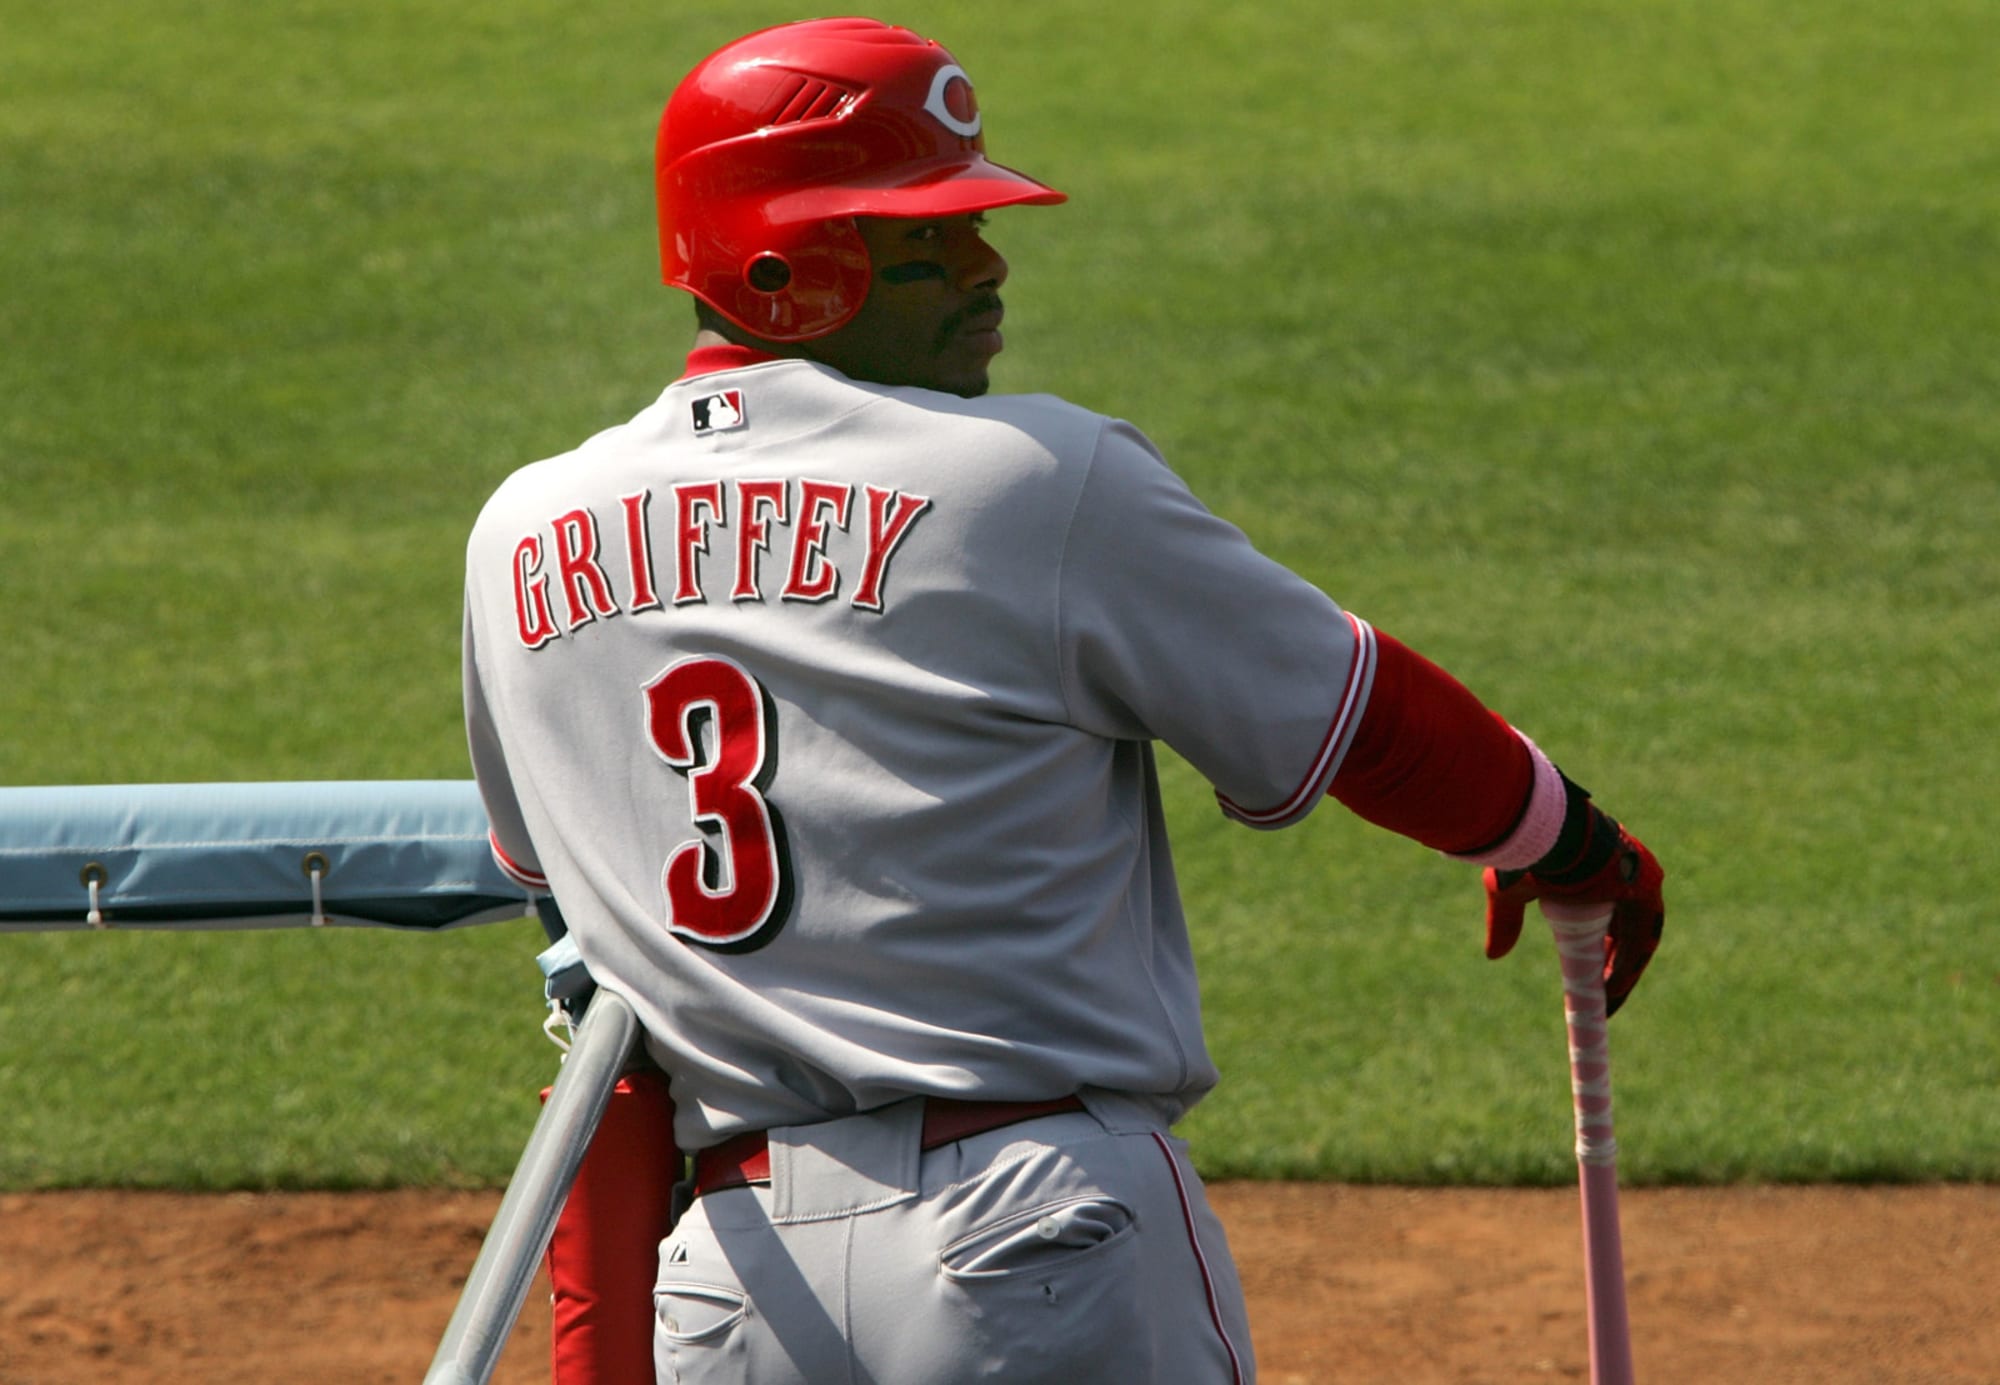 Cincinnati Reds Who was the best player in team history to wear No. 3?